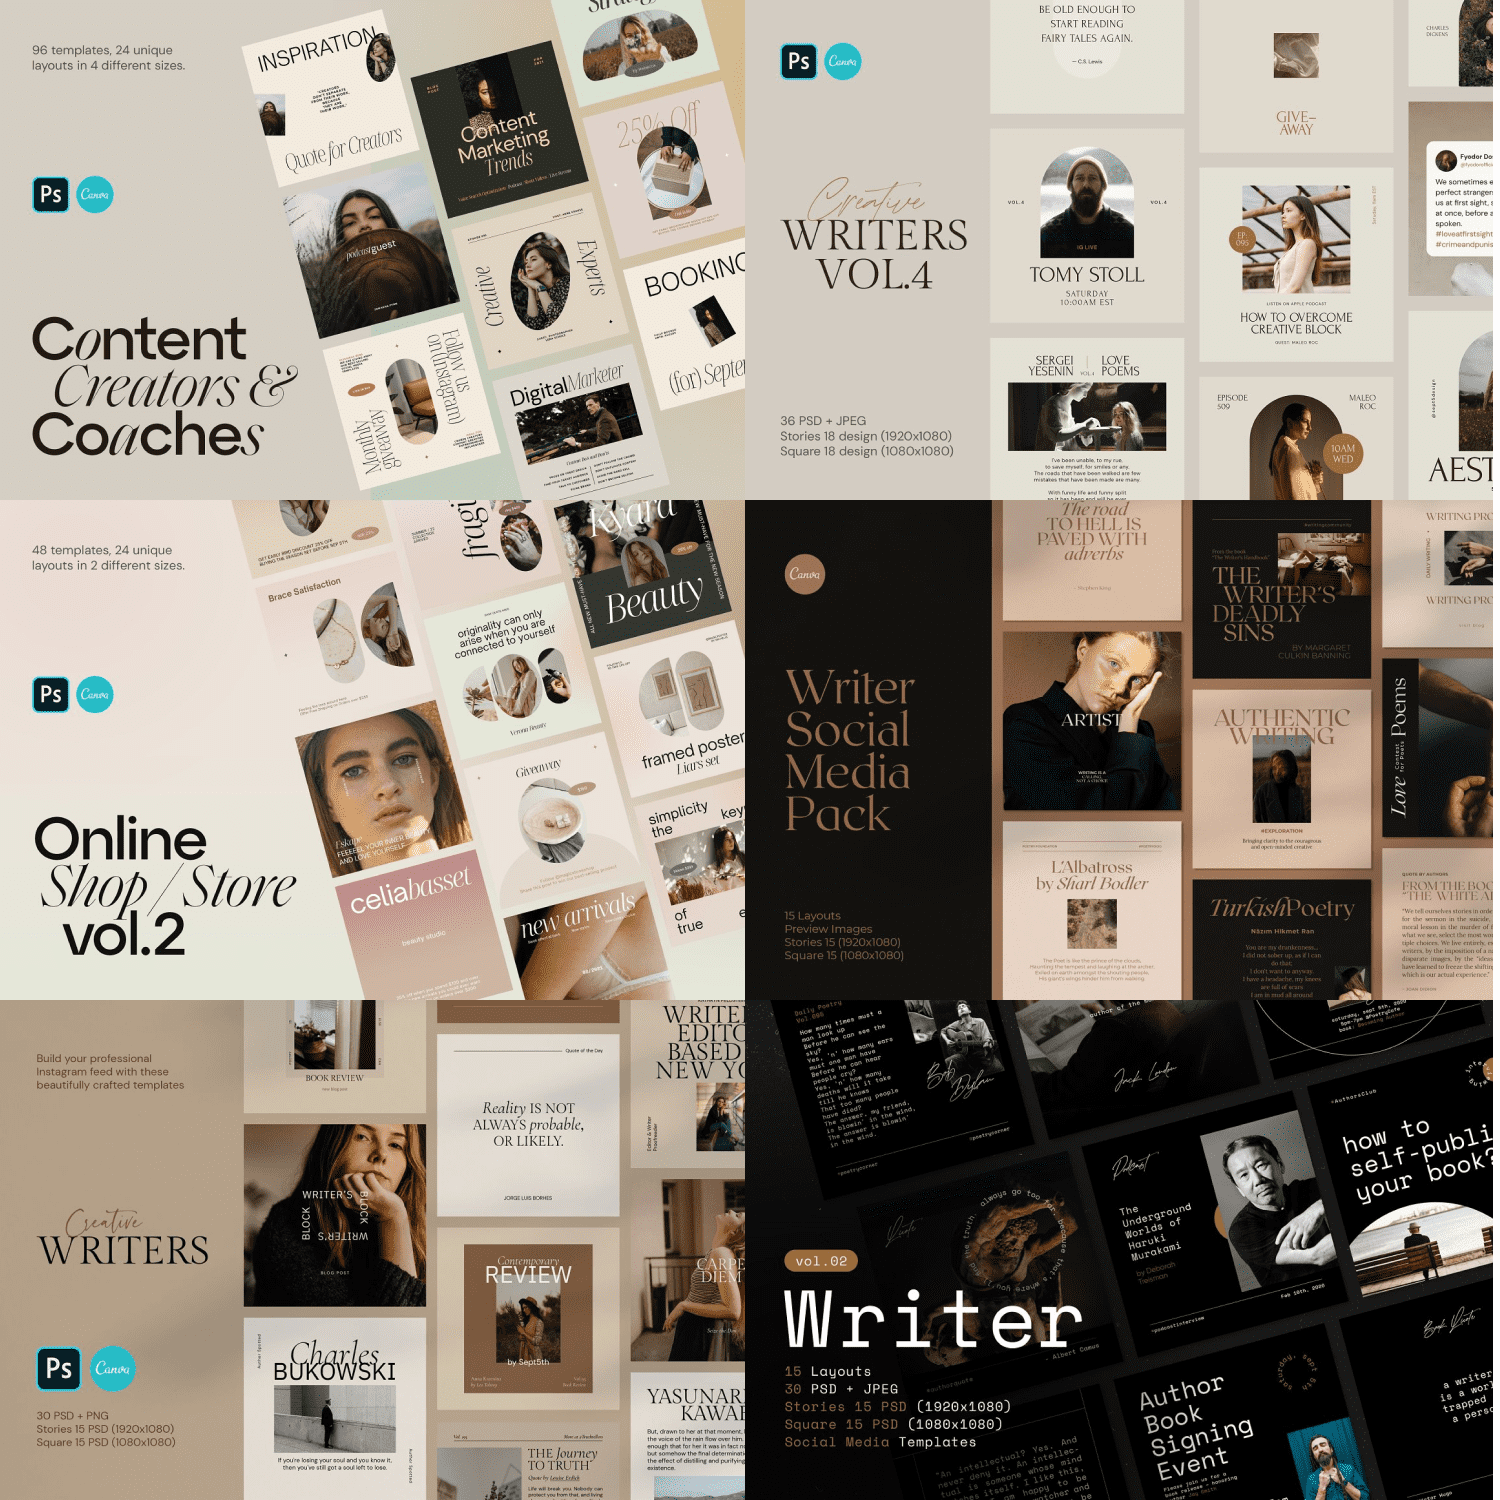 Instagram BUNDLE - Canva & PS created by September 5th.